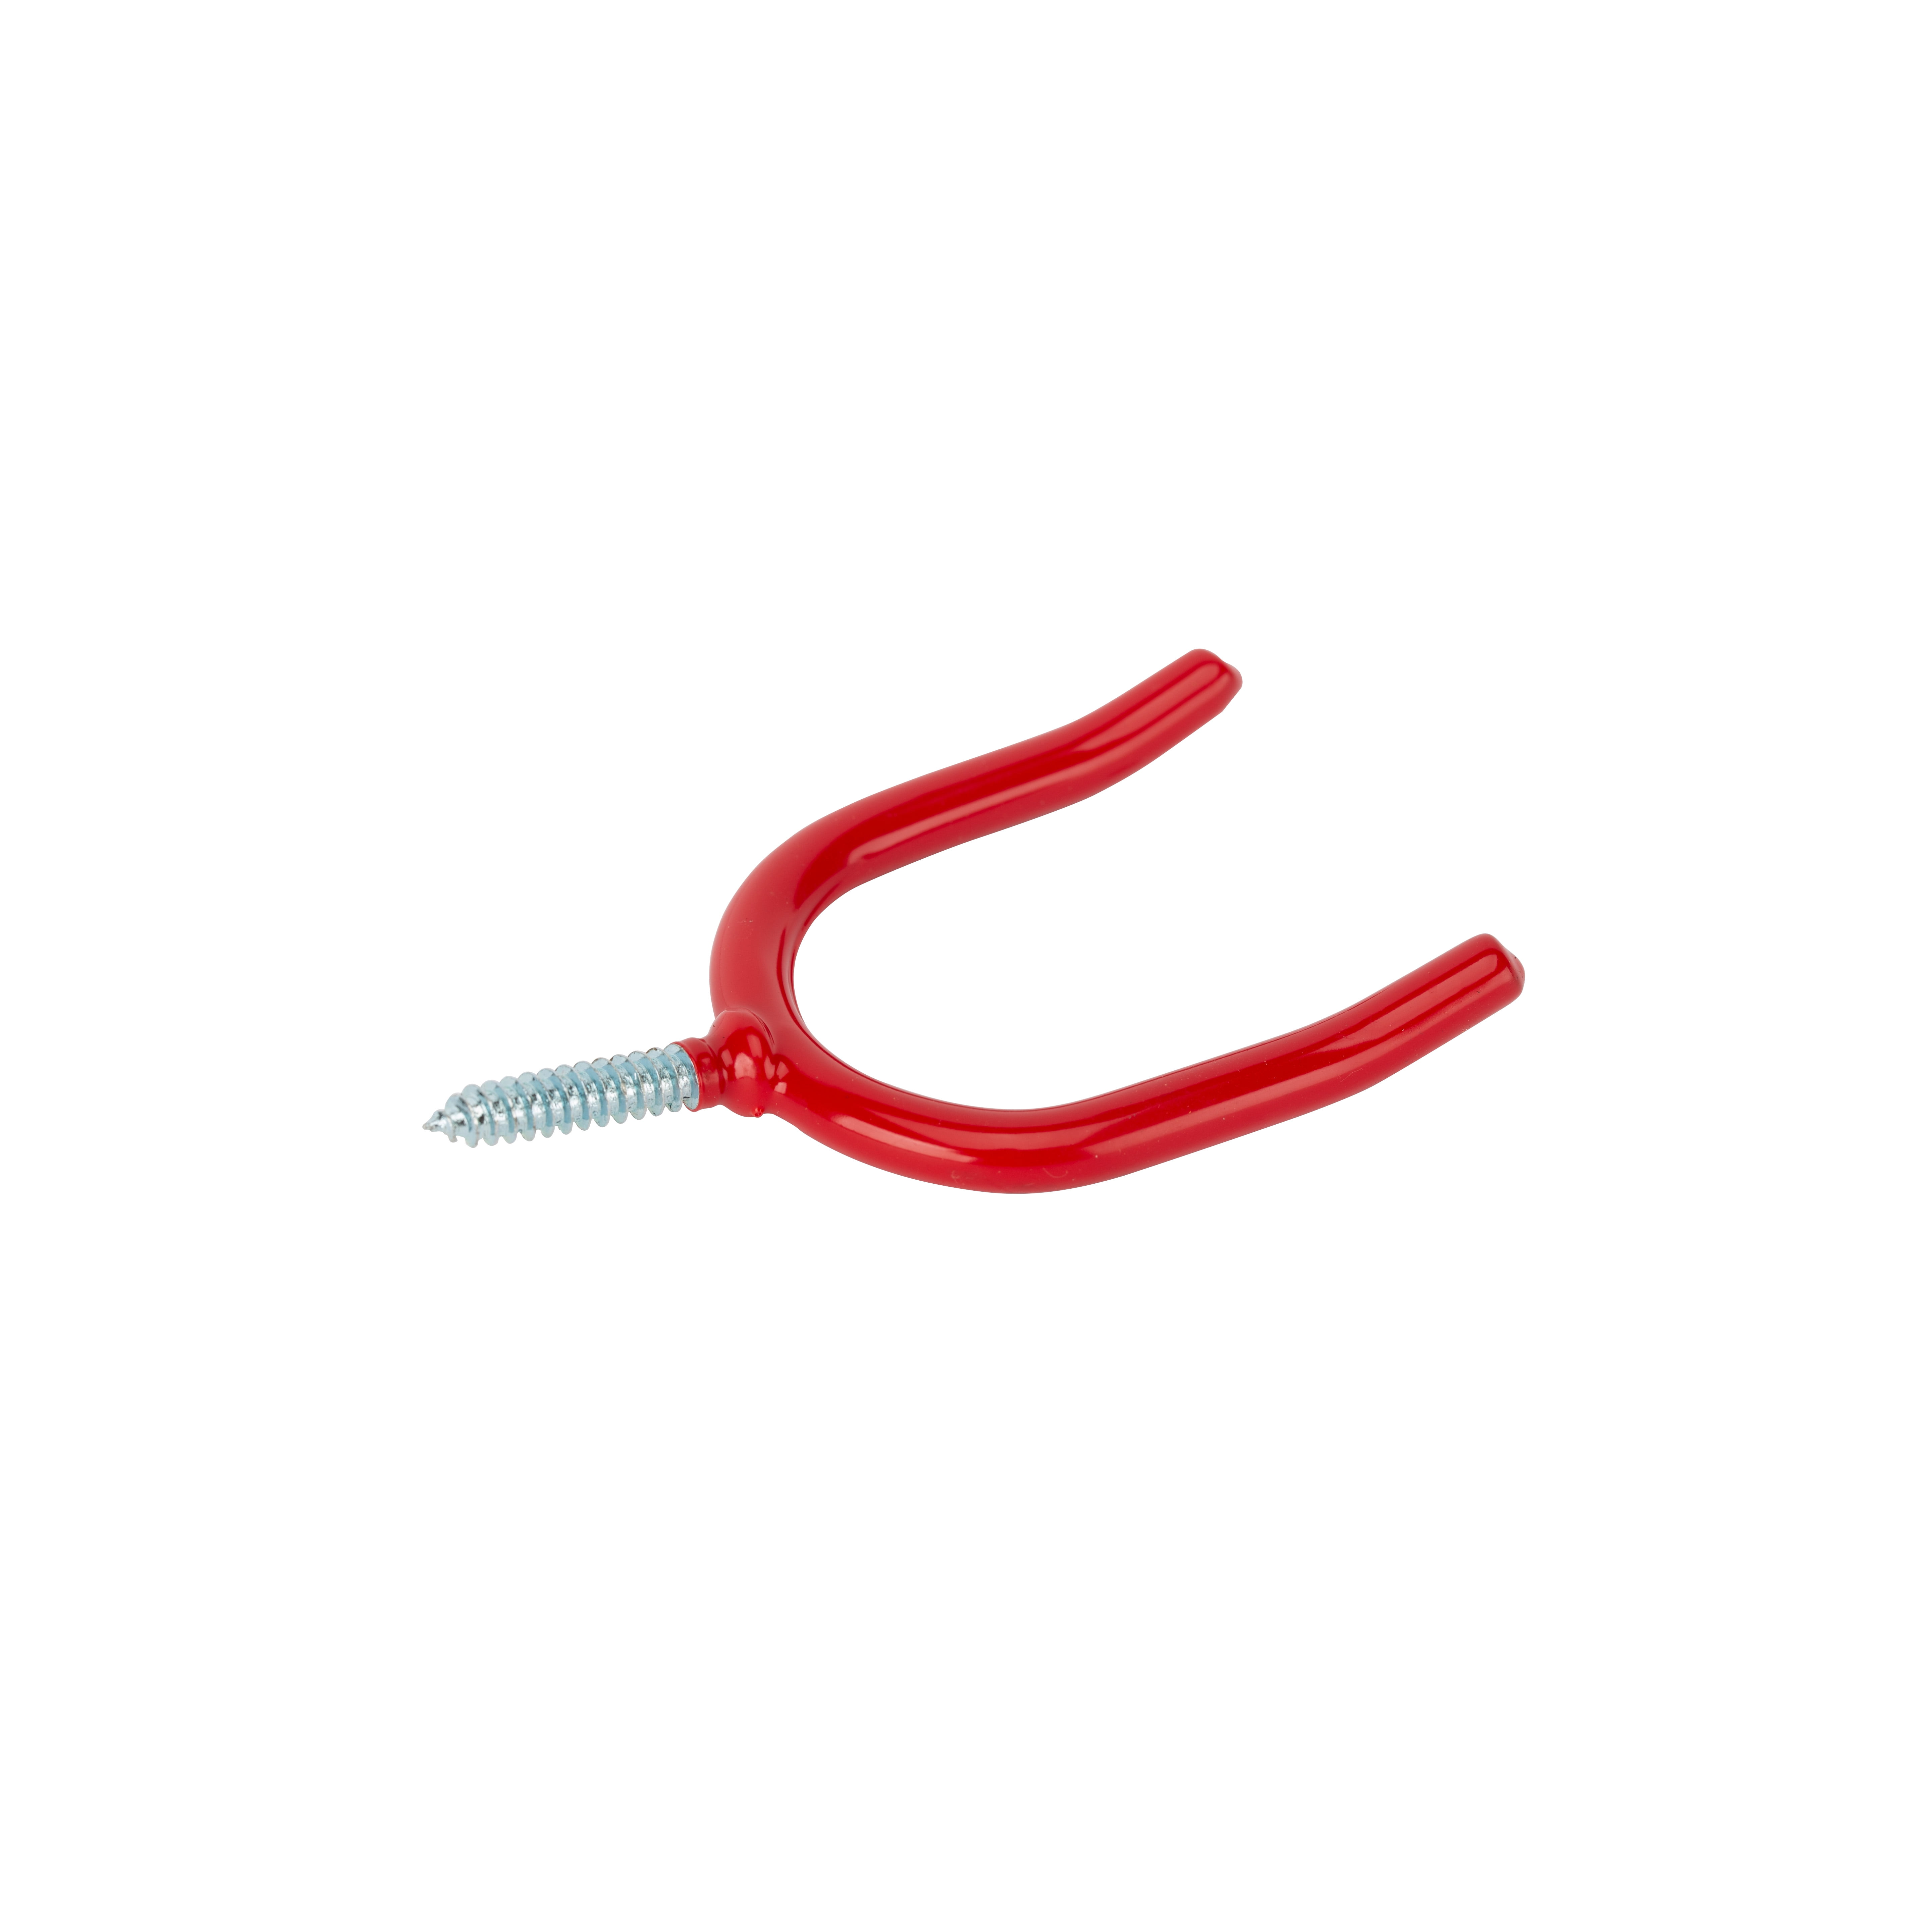 Screw-In Vinyl Coated Red Storage Hook (2-Pack) - Gillman Home Center